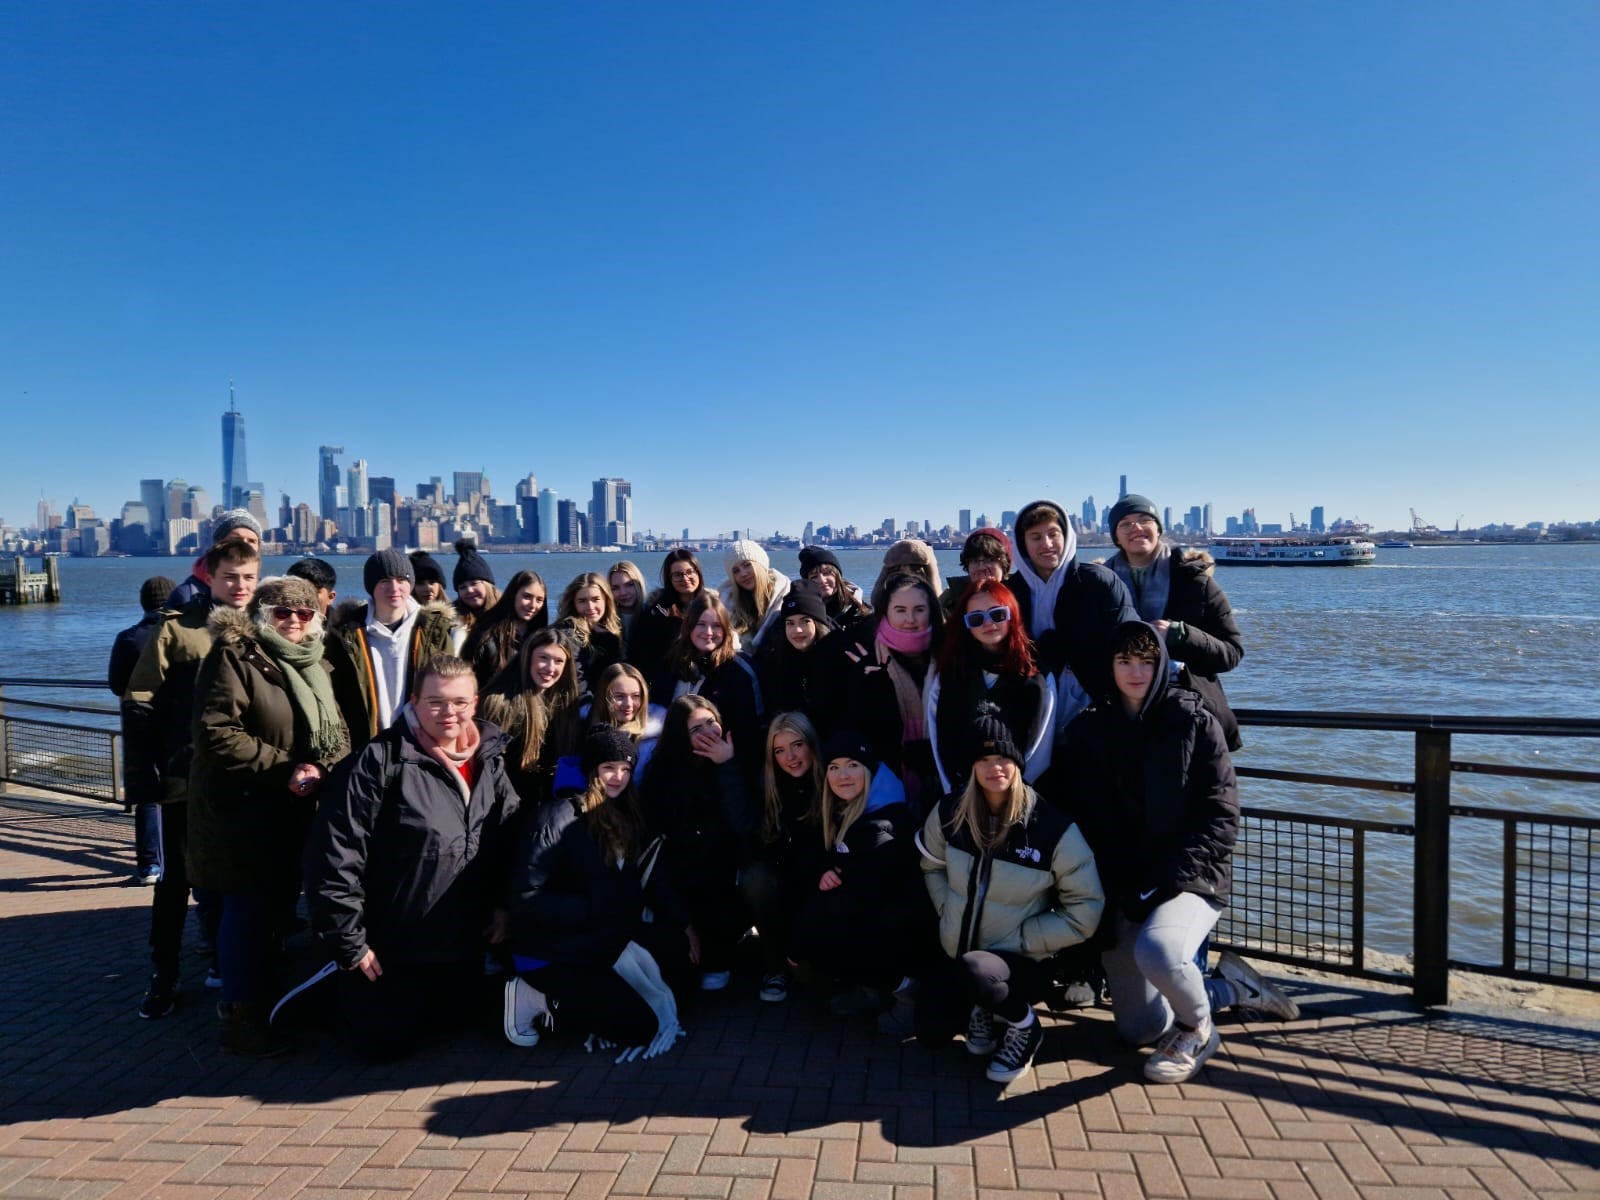 Liberty Island with the New York skyline in the background.